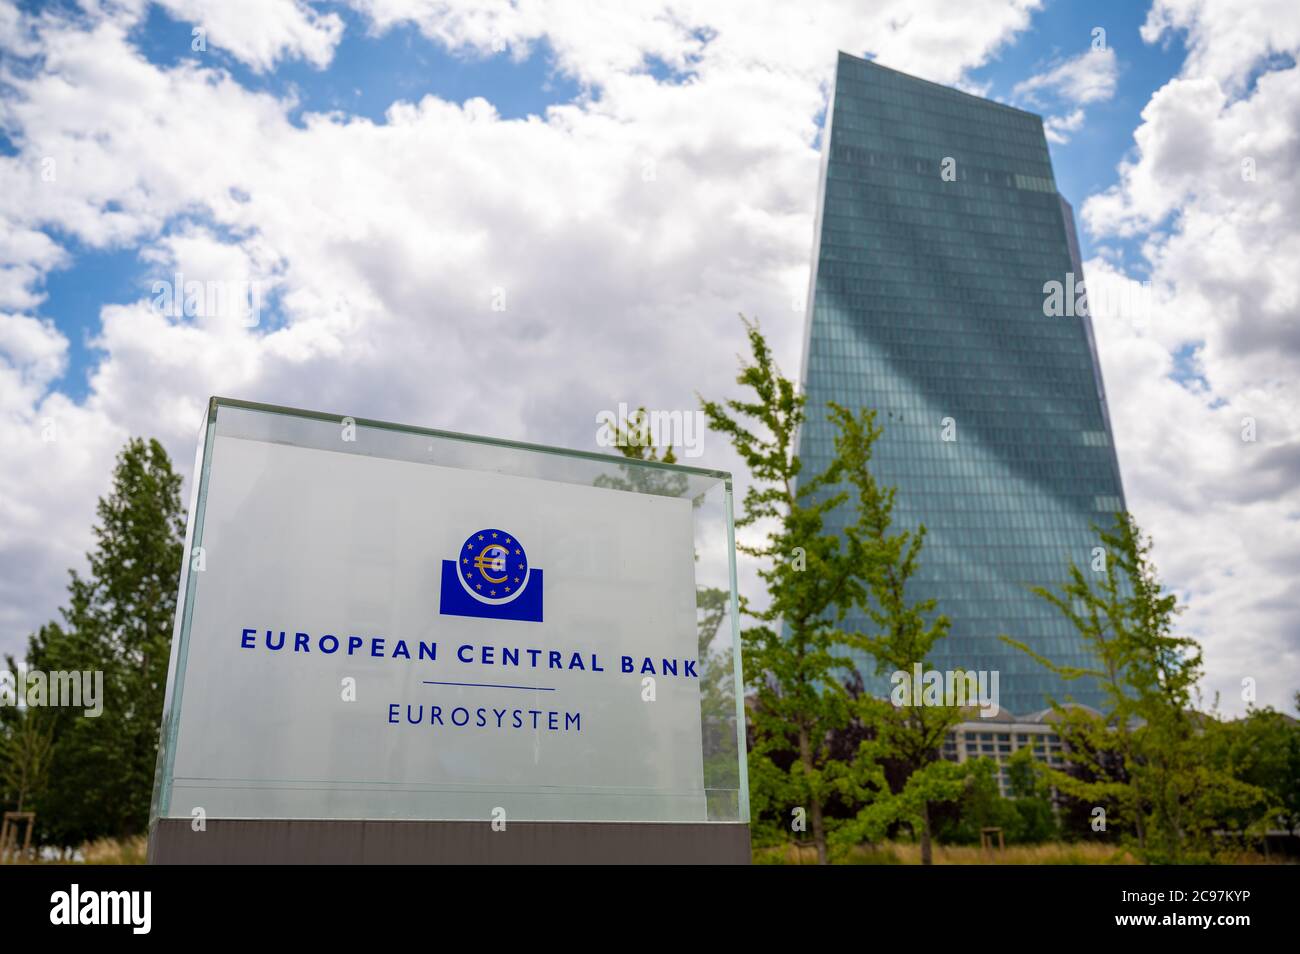 European Central Bank main building in Frankfurt, Germany on the banks of the River Main Stock Photo